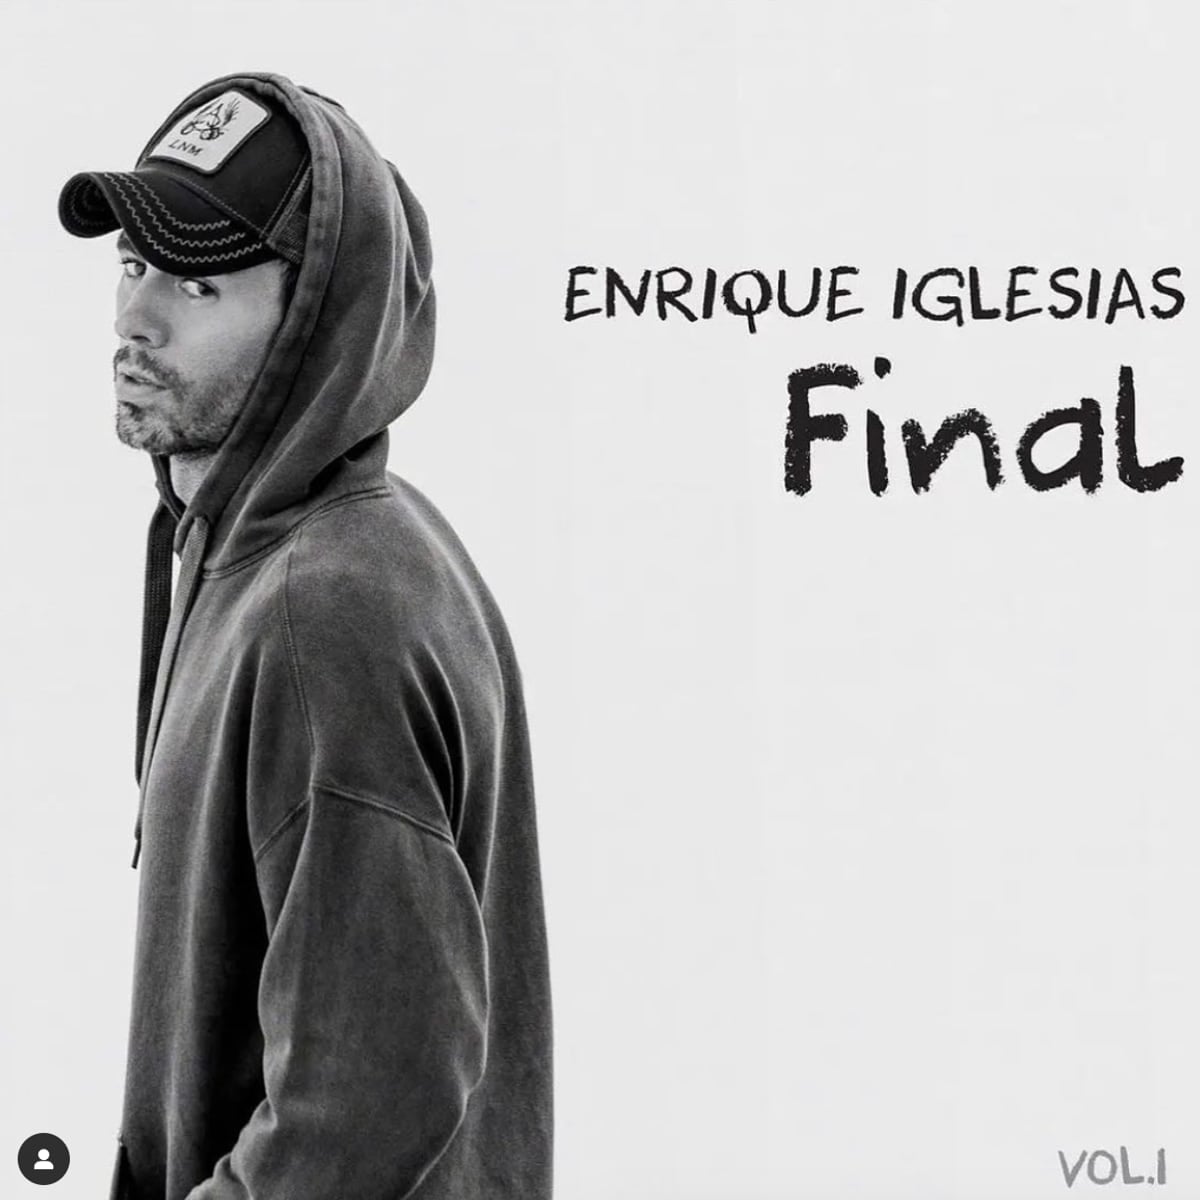 Iglesias released his latest album, Final Vol.2, which he has announced will be the last album of his career